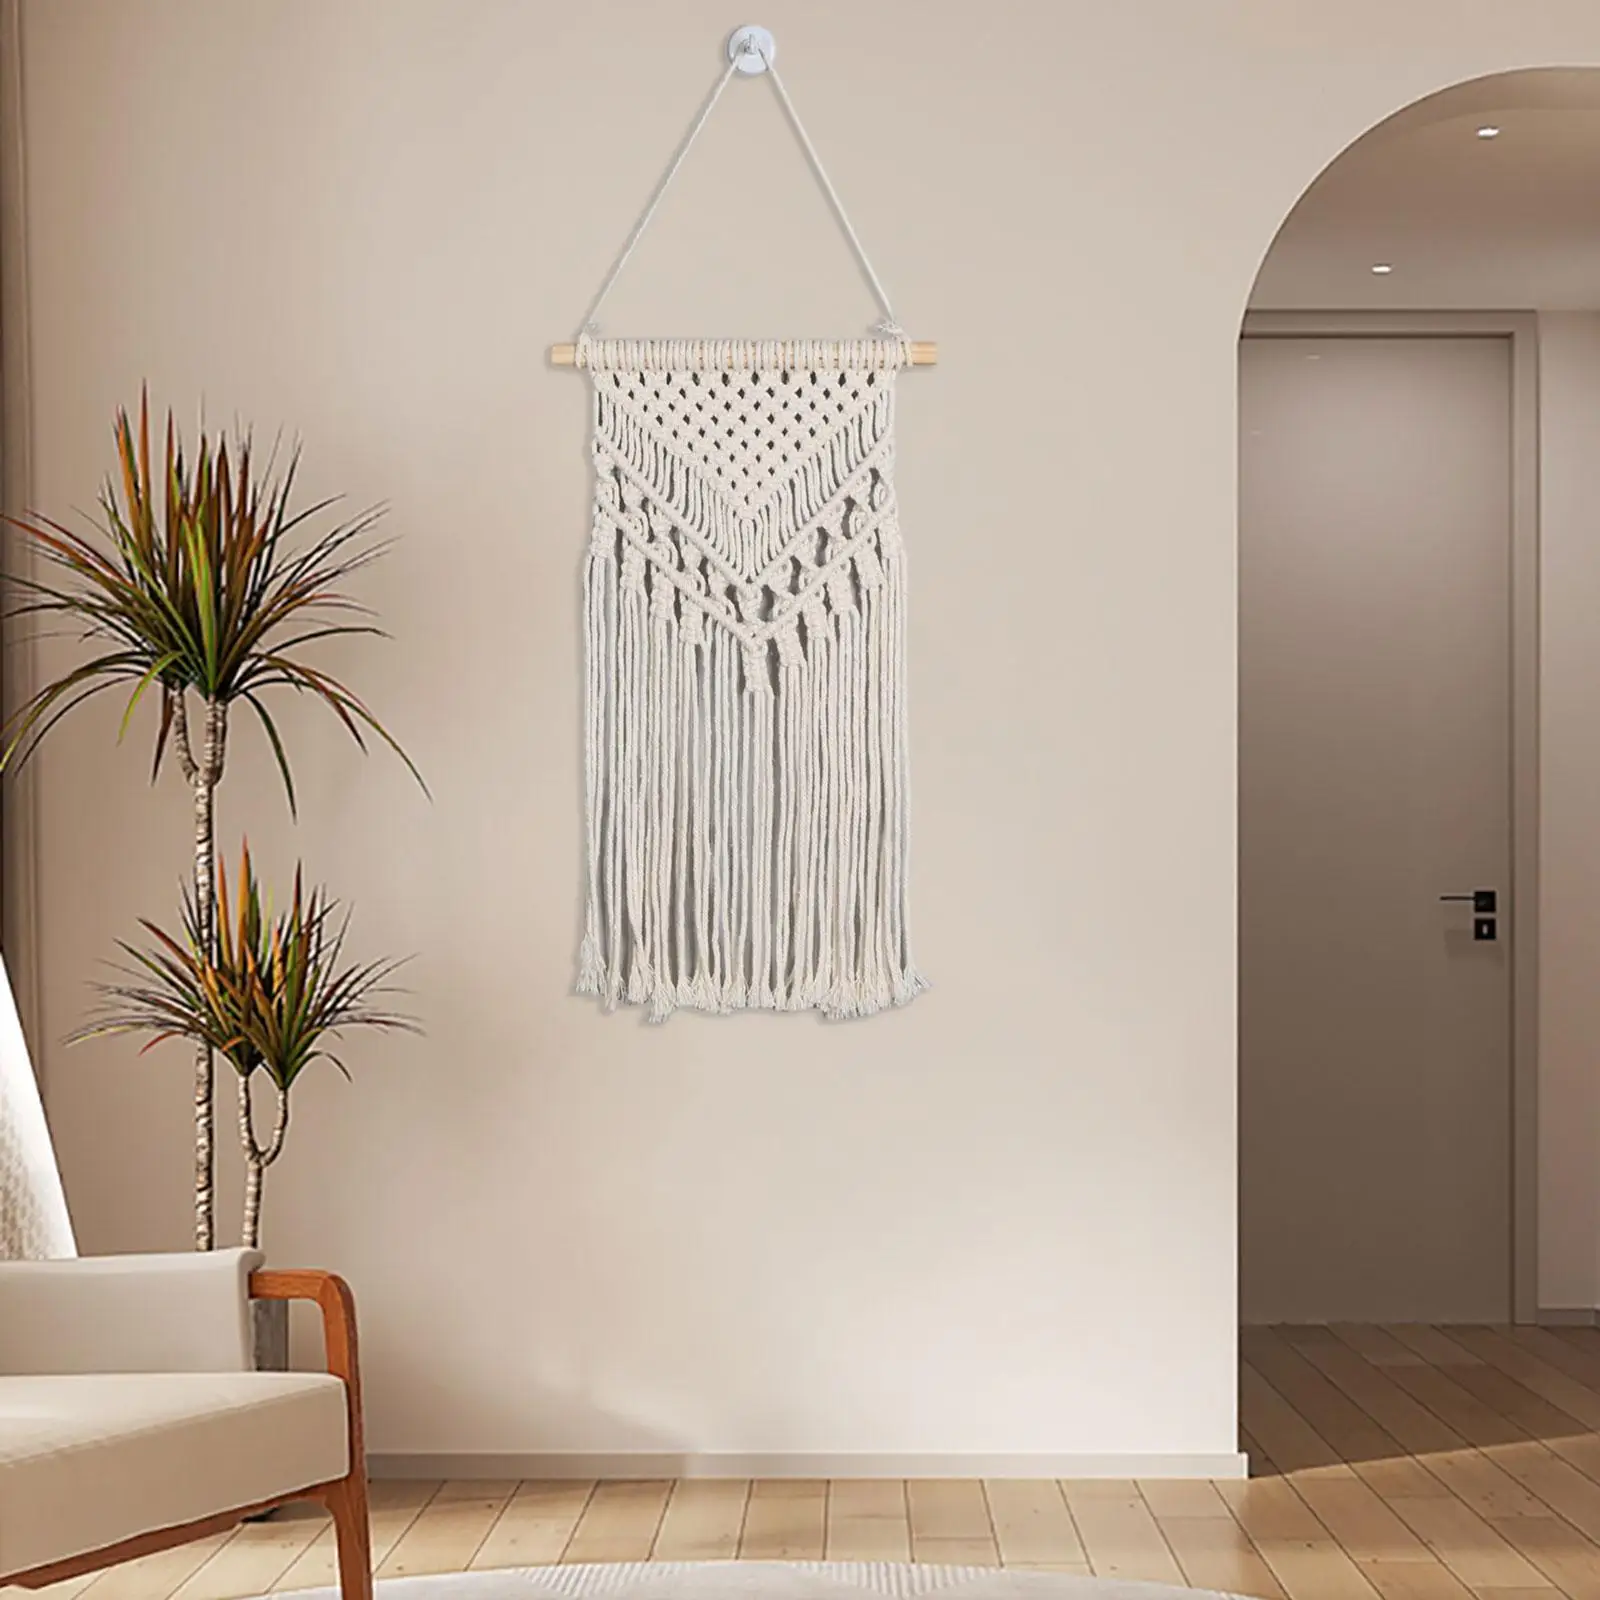 Macrame Wall Hanging Decor Wood Bohemian Style Tassel Woven Wall Art Decor Macrame Tapestry for Party Apartment Living Room Home